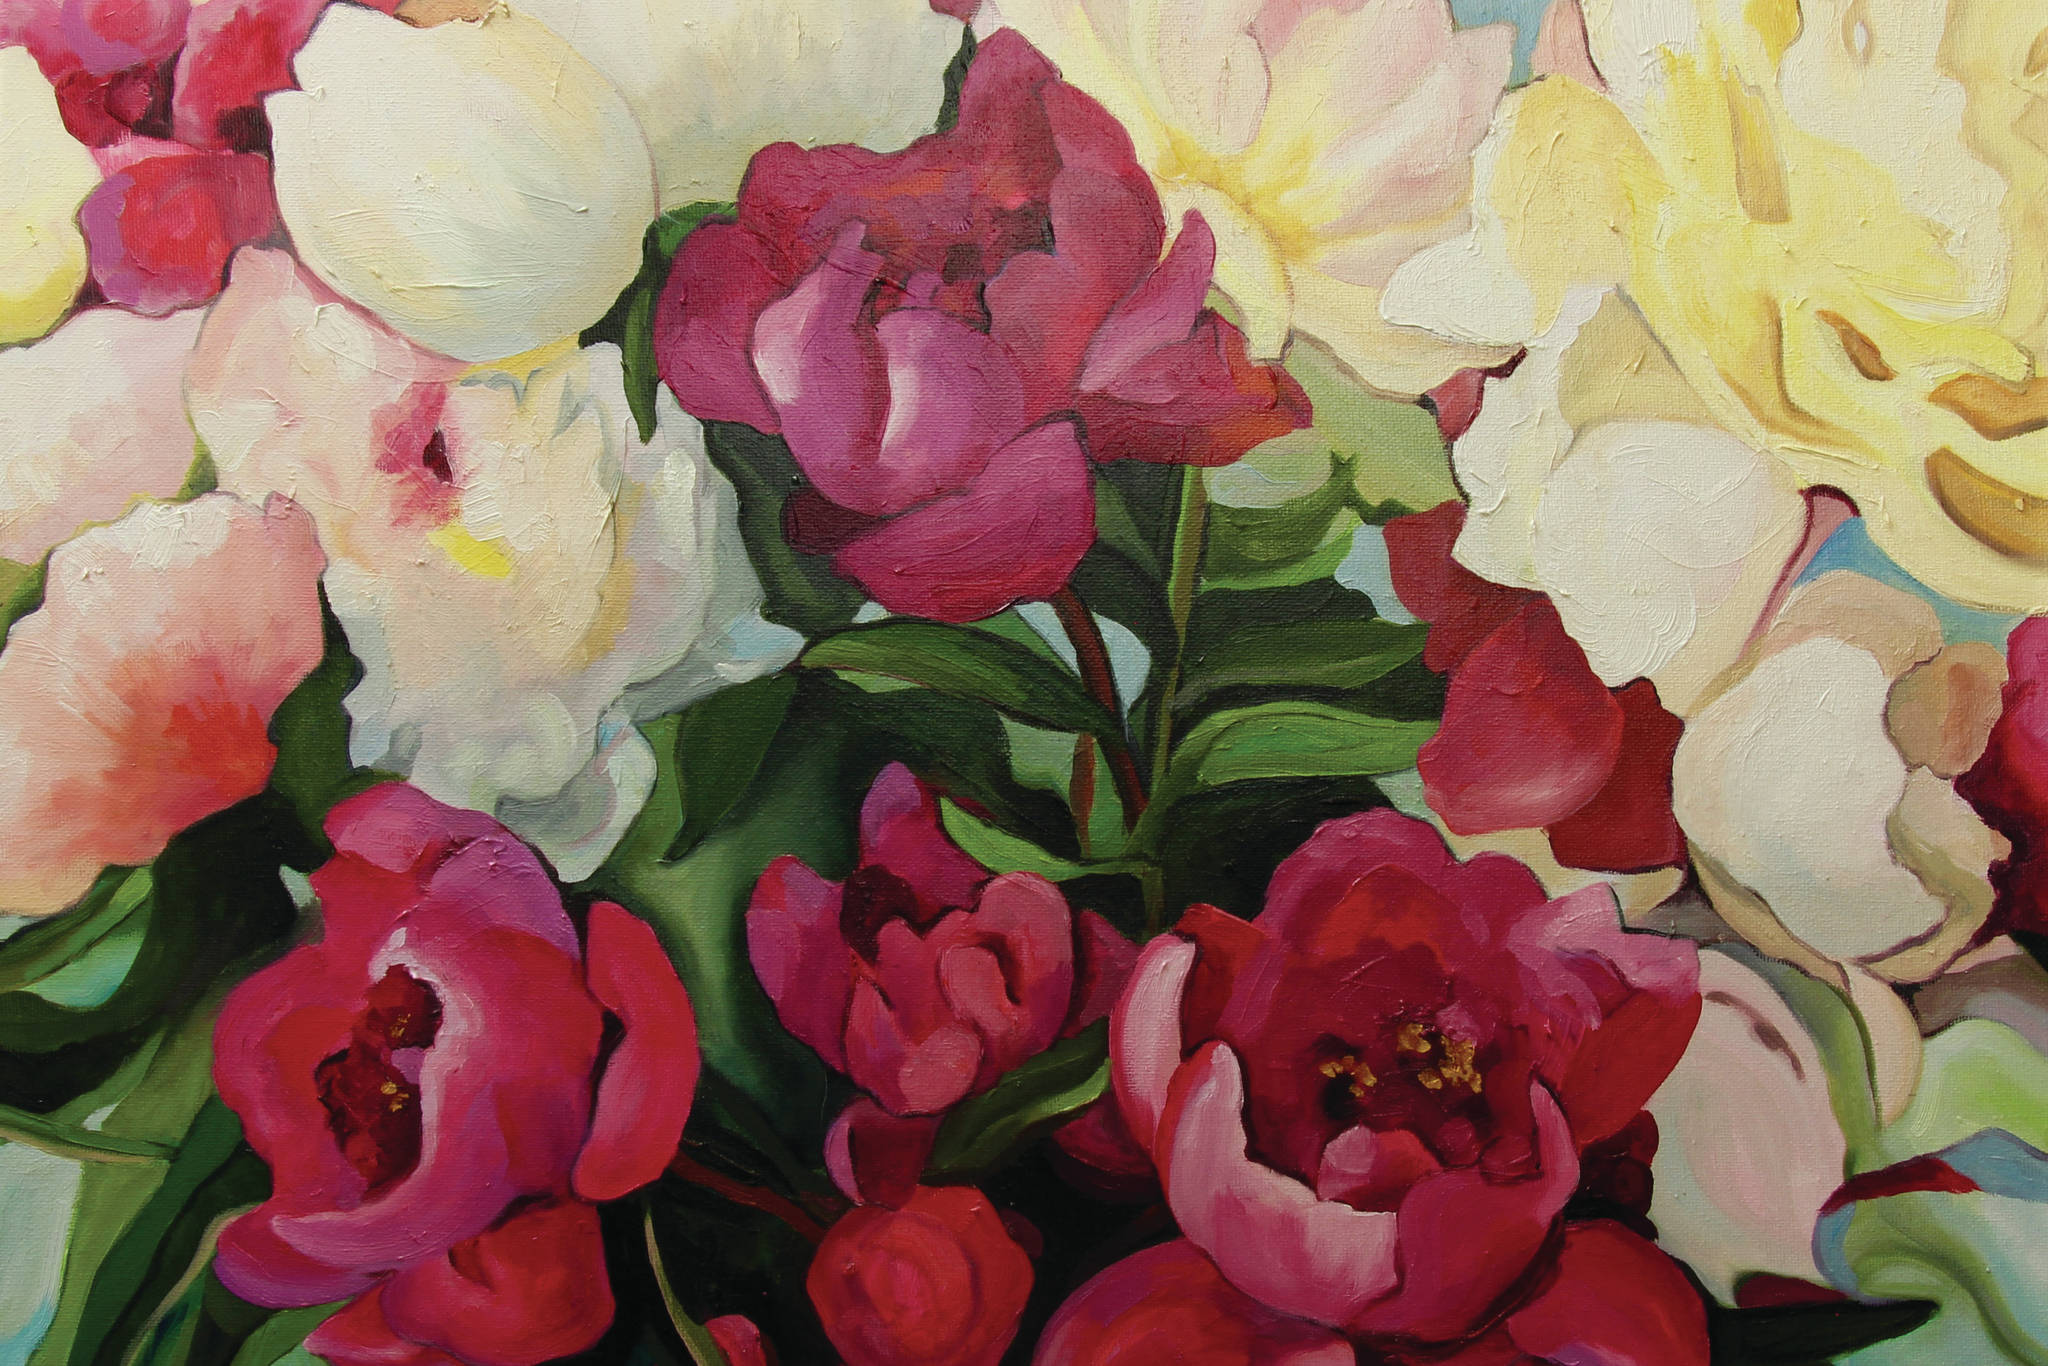 A painting from Gerri Martin's exhibit, "Peonies: Alaska’s Floral Gems,” that opened Friday, July 2, 2021, at Fireweed Gallery in Homer, Alaska. (Photo provided)